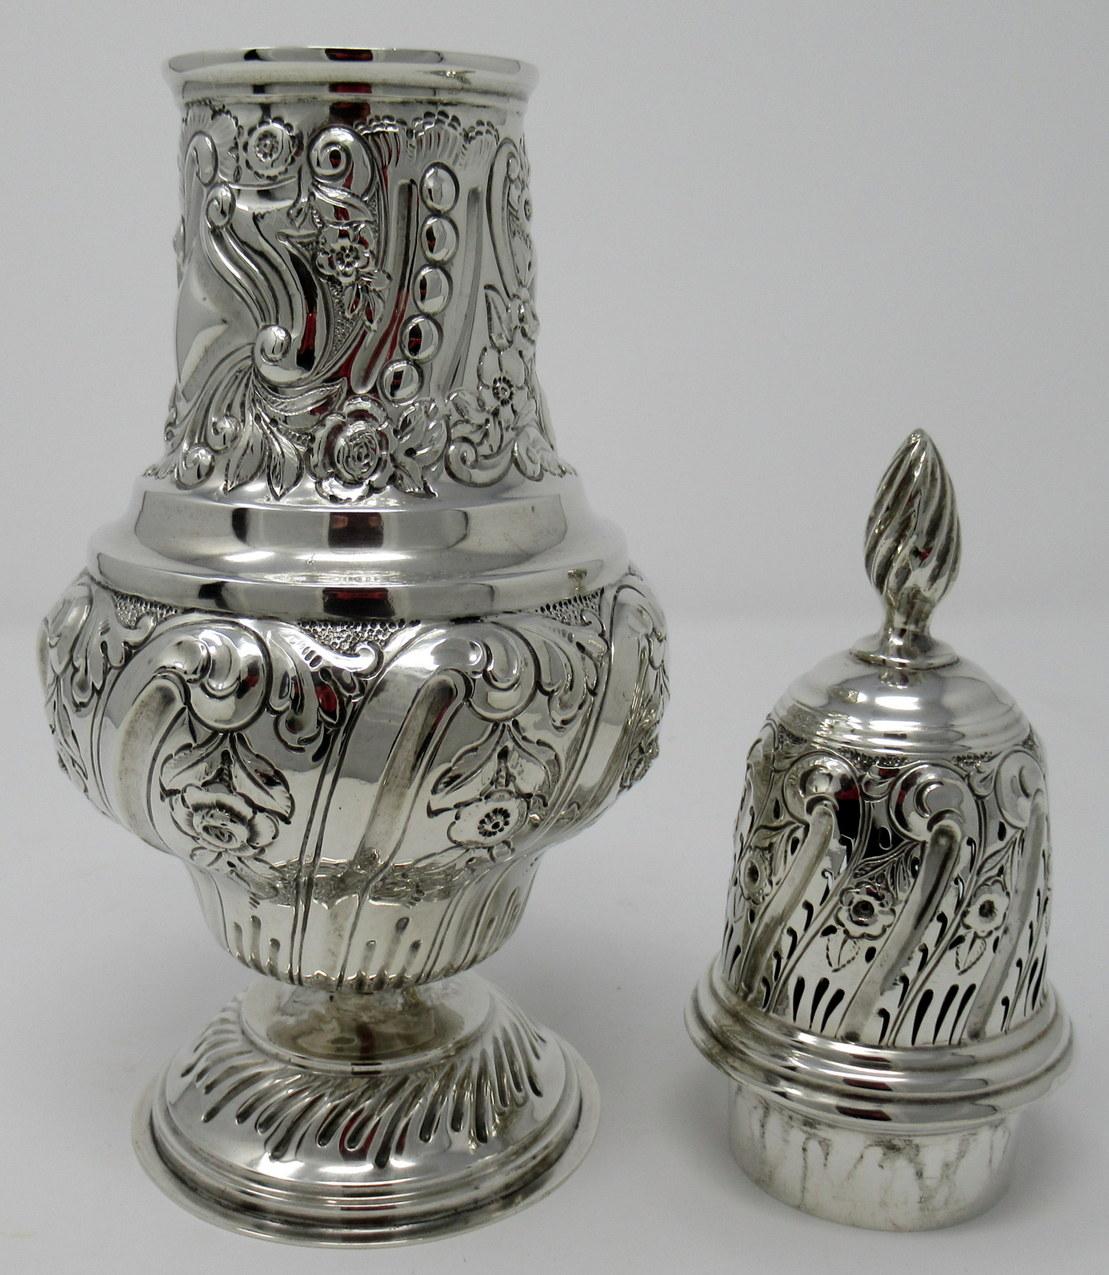 Stunning sterling silver sugar caster of typical baluster form and unusually large size, early 20th century.

The entire embossed with lavish decoration of latticework and scrolls, the pierced pull-off lid with similar decoration and scrolling